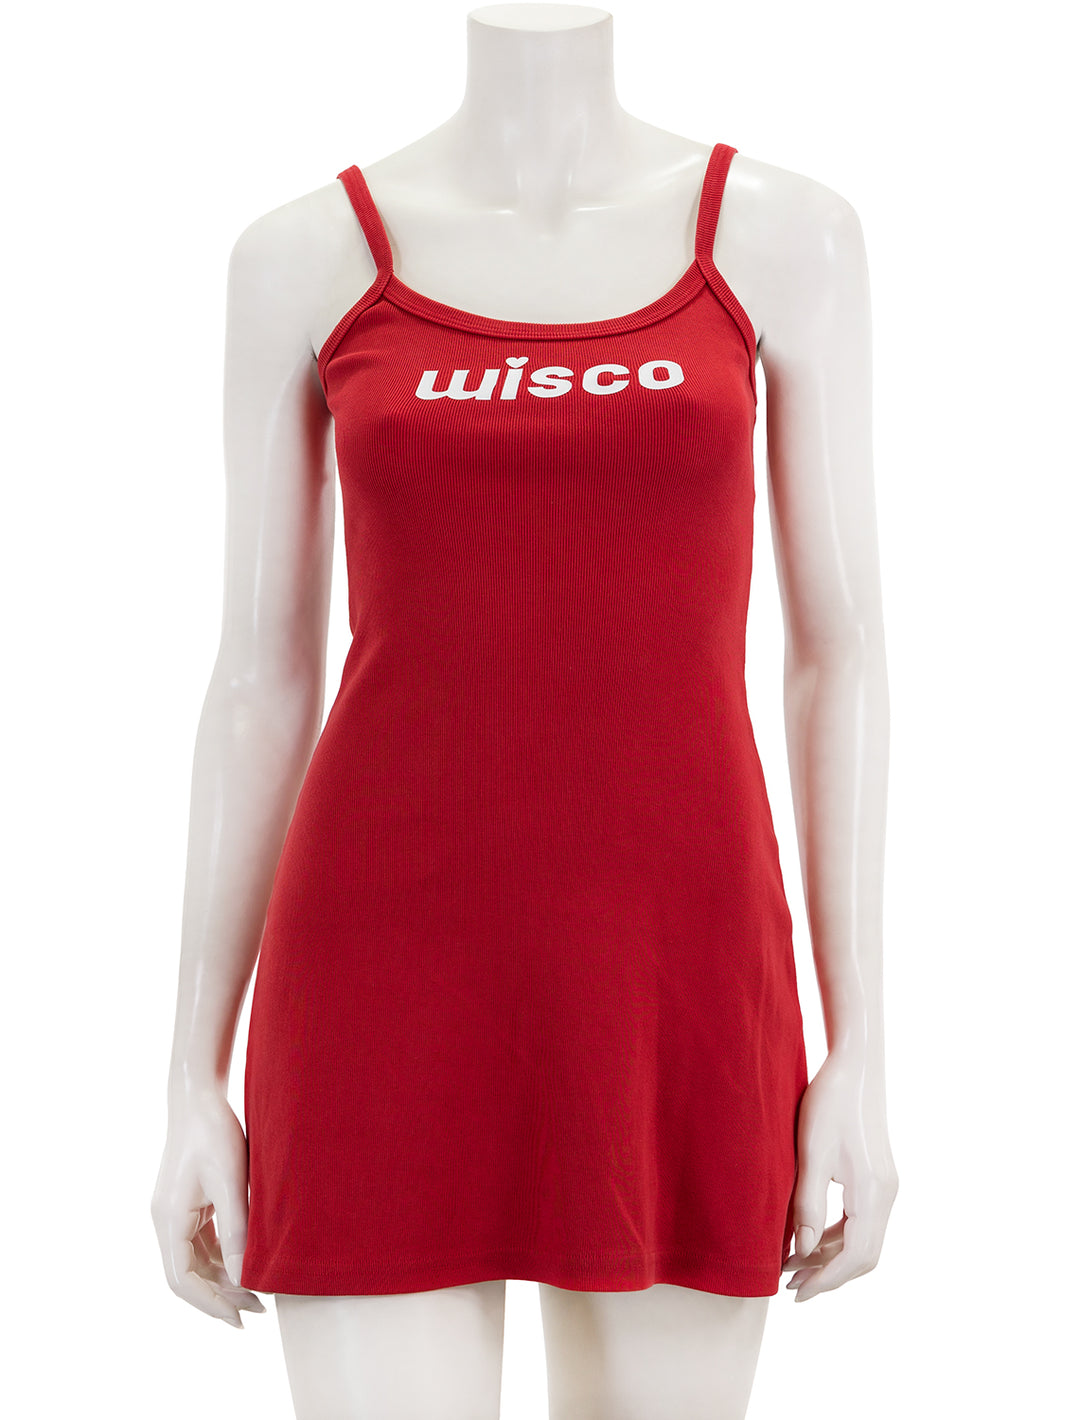 Front view of Recess Apparel's wisco tank dress.